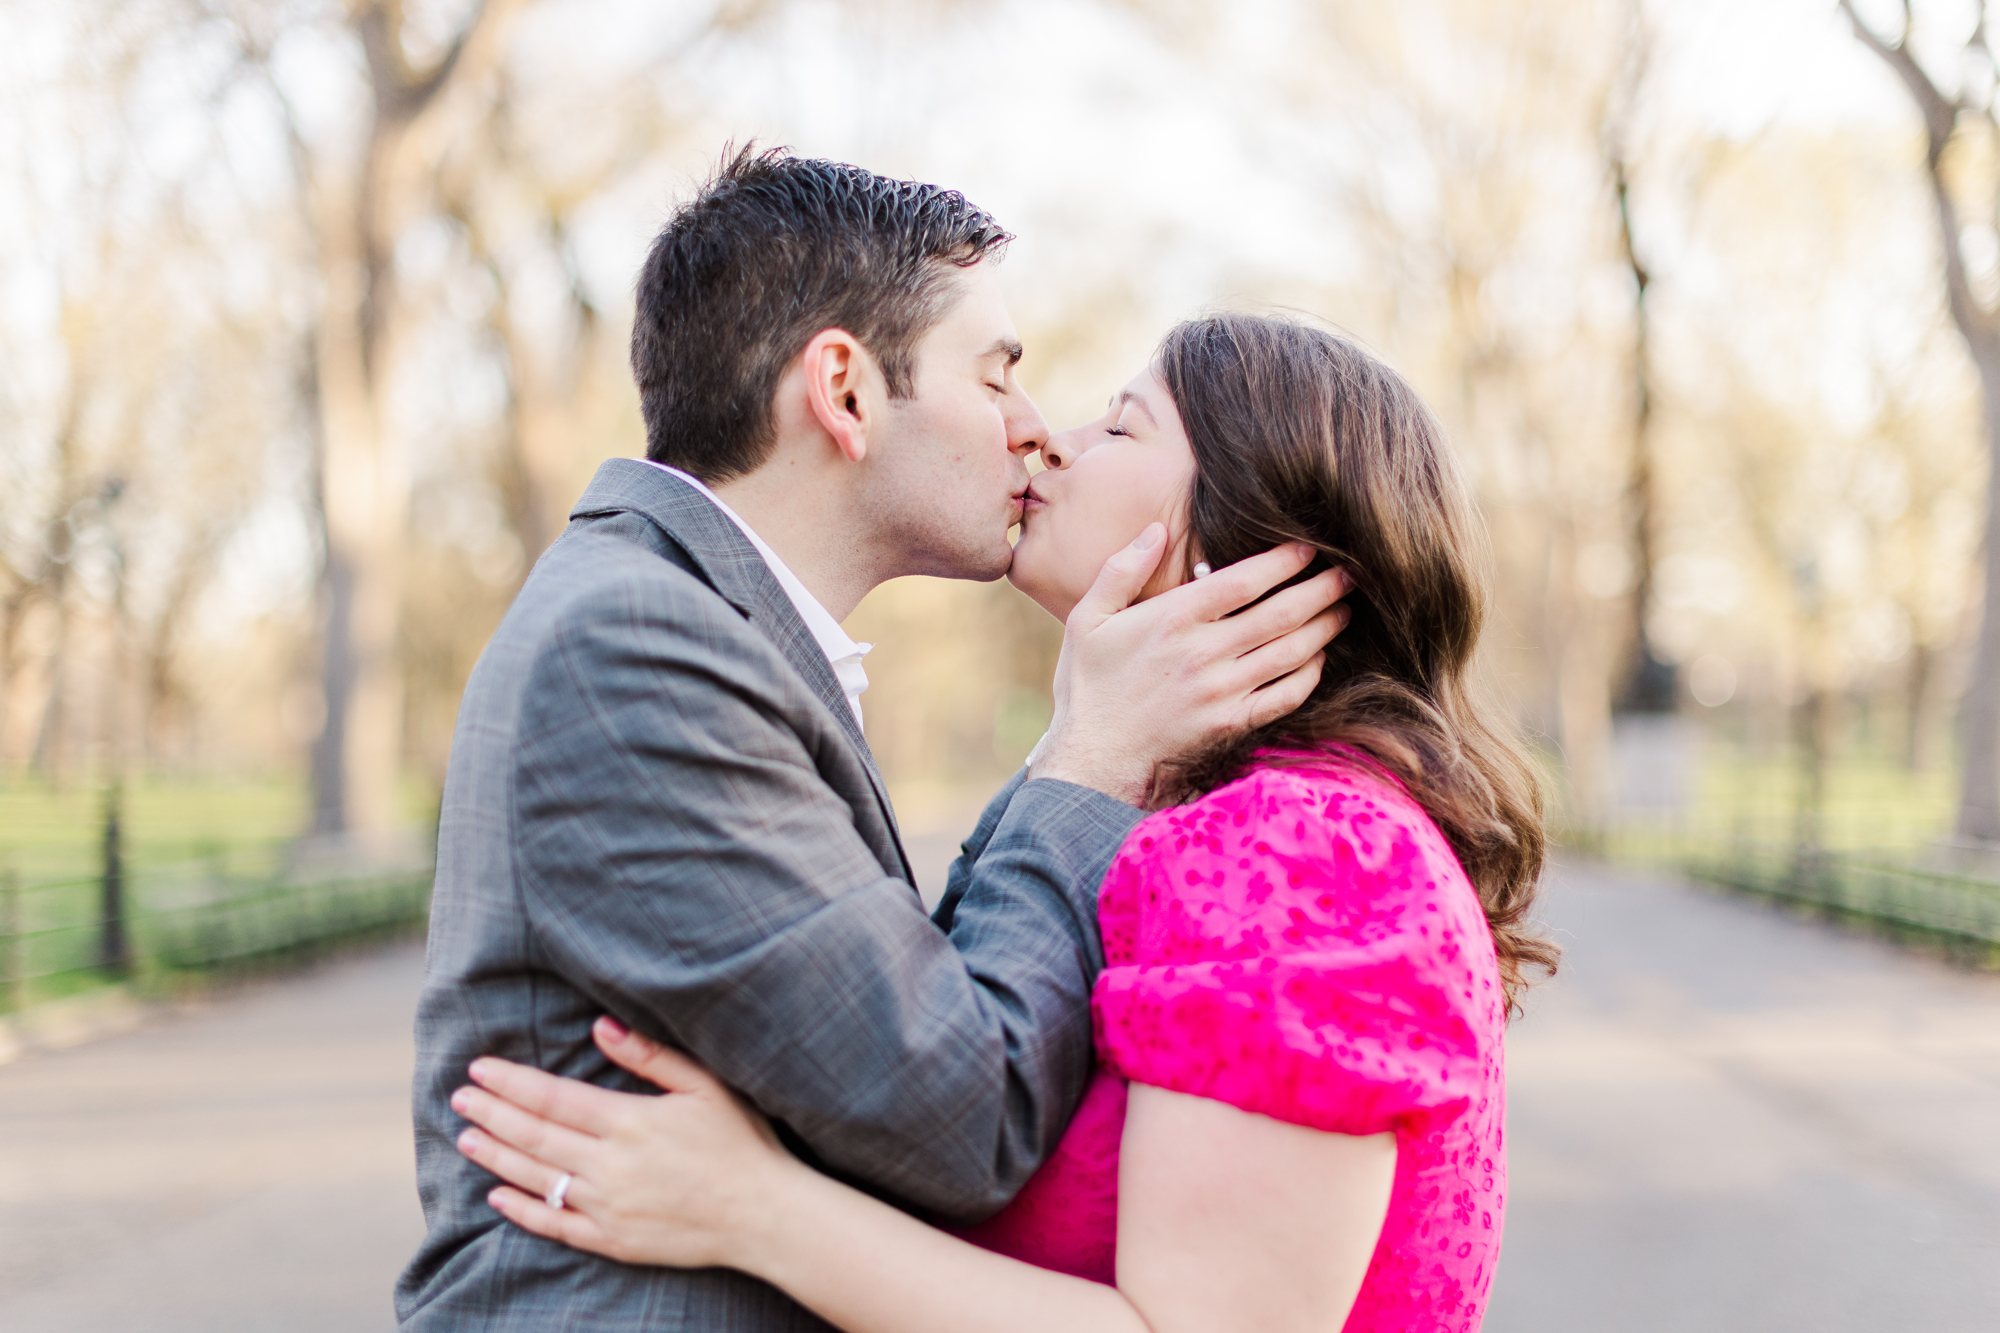 Breath - Taking Spring Engagement Photography in NYC